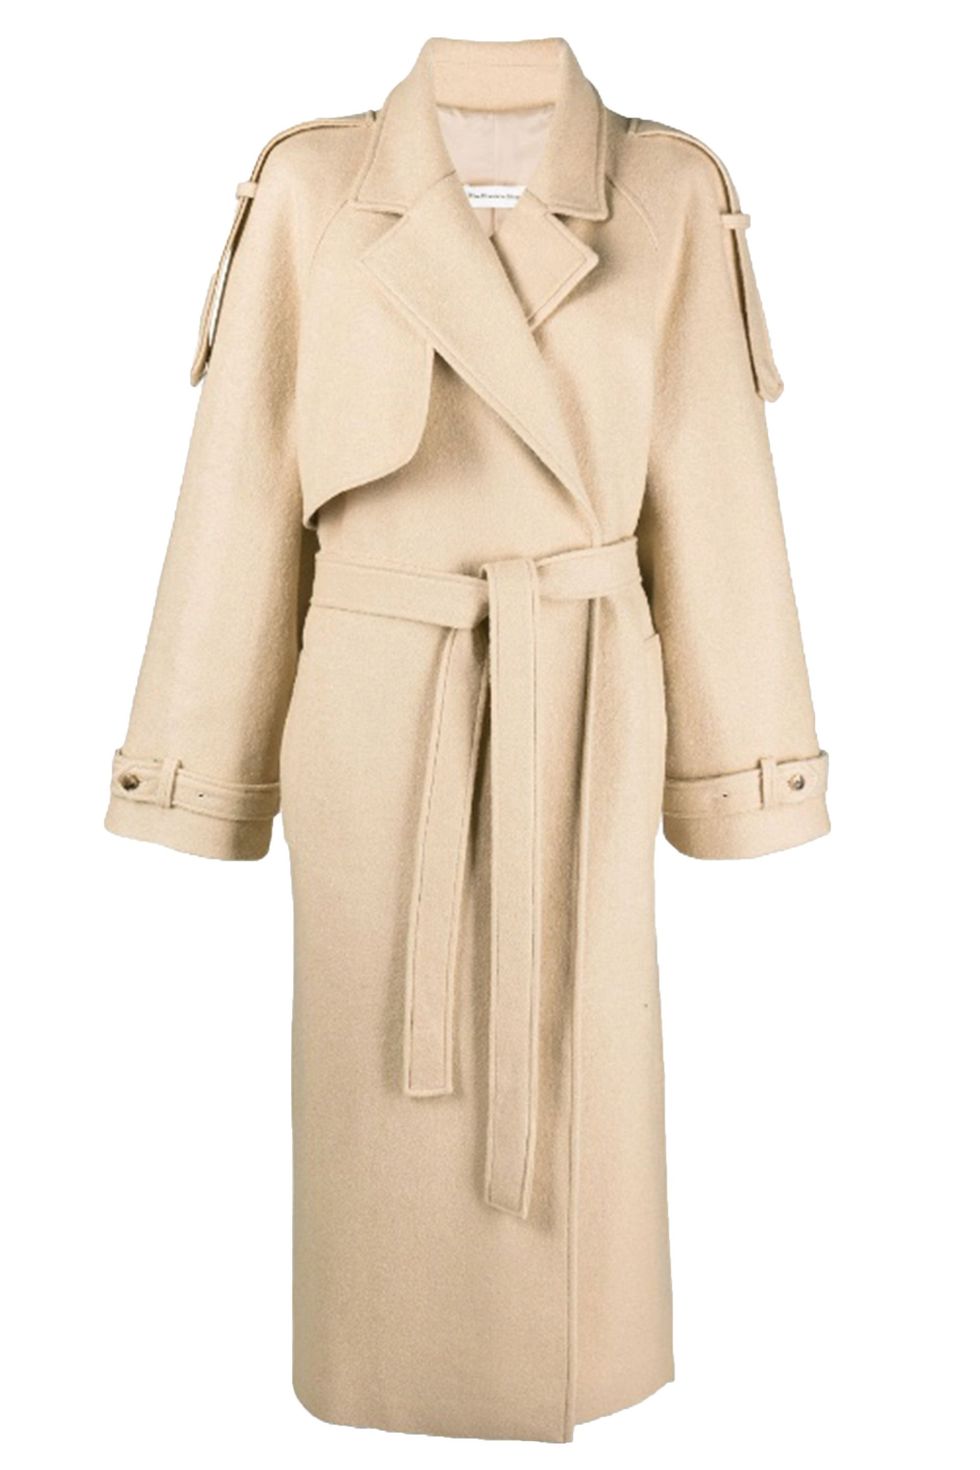 The Frankie Shop trench coat